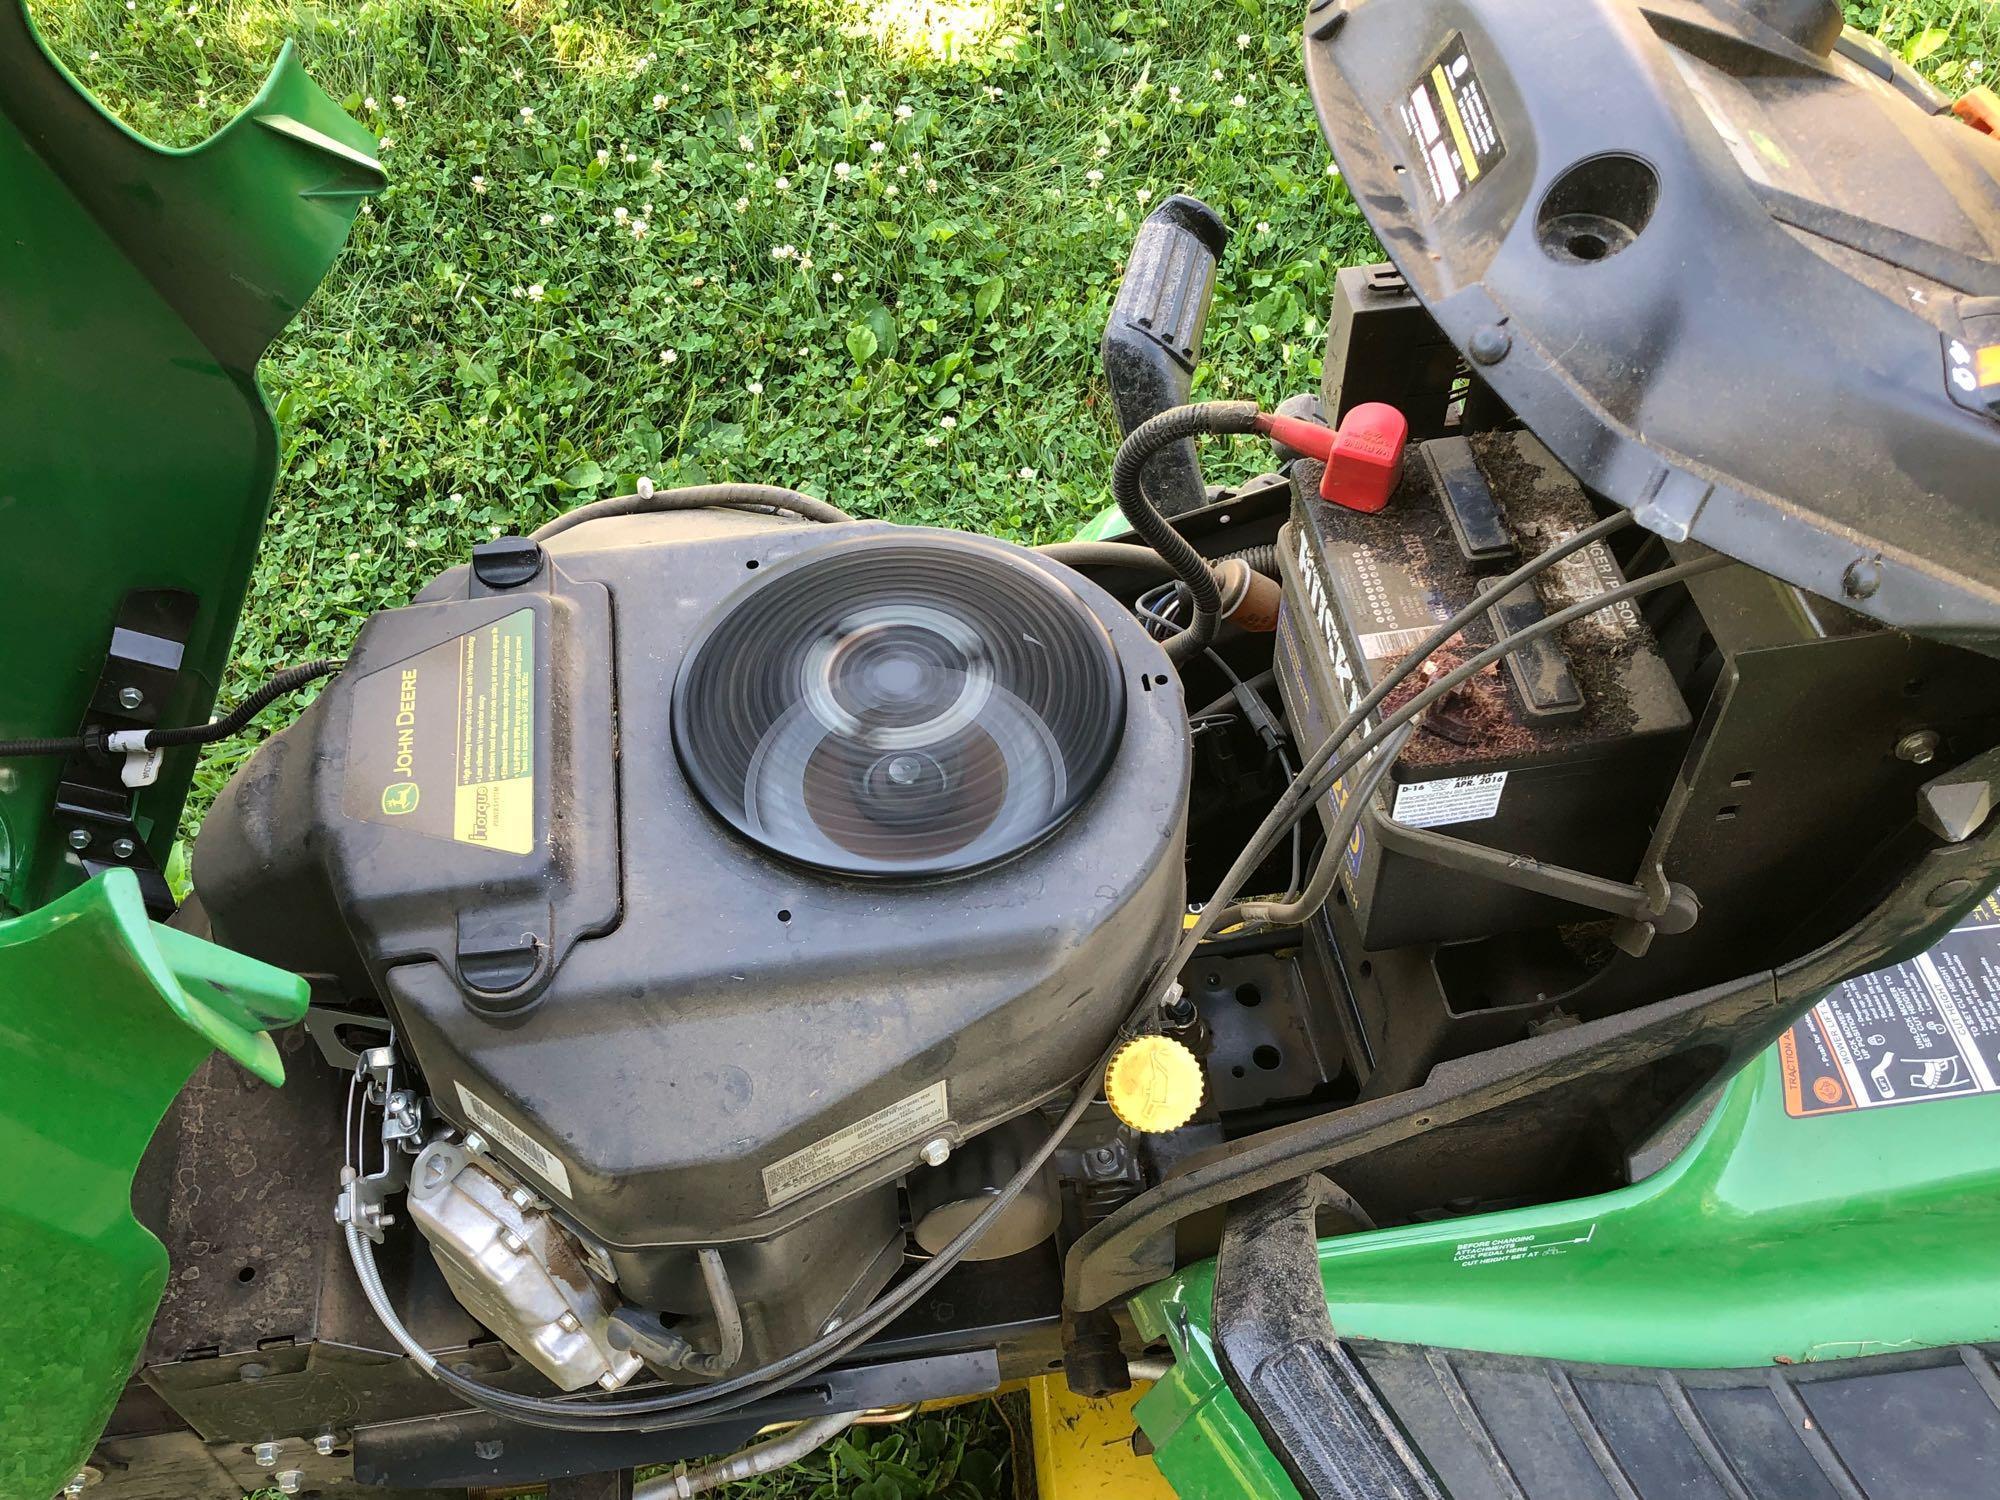 JOHN DEERE(X300) lawn tractor/42" mower deck in running condition showing only 172 hours of run time